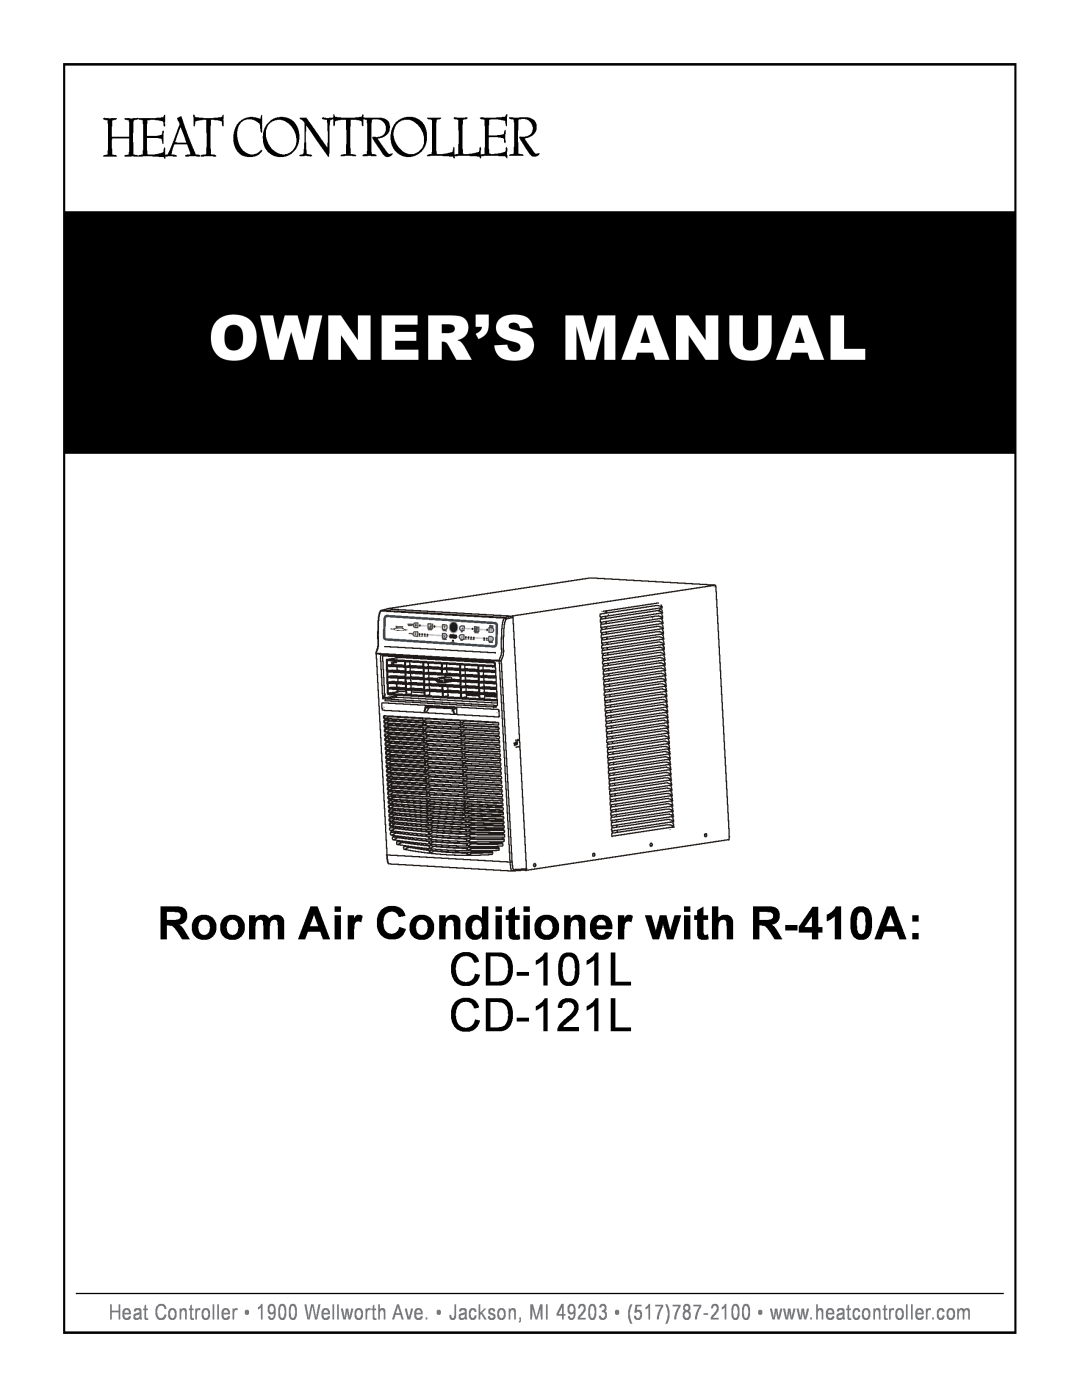 Heat Controller CD-121L manual Owner’S Manual, Room Air Conditioner with R-410A, CD-101L 